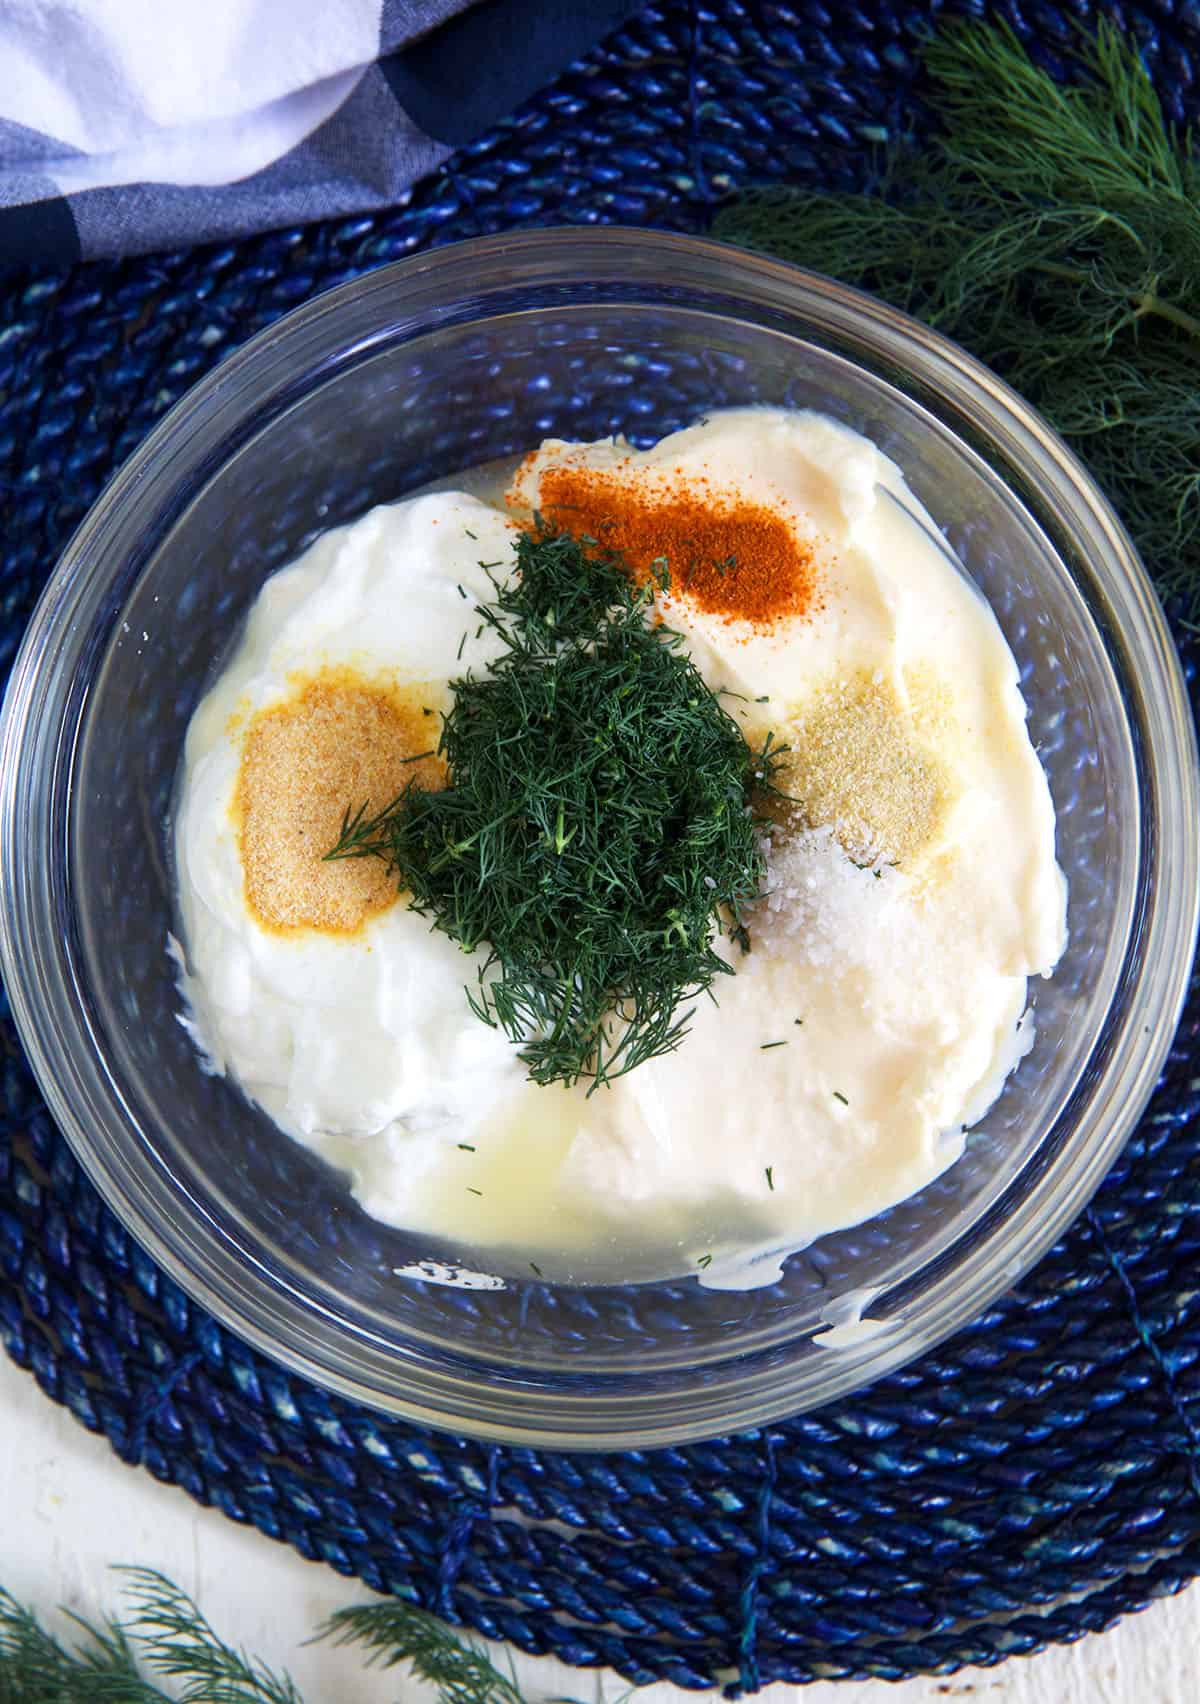 The ingredients for homemade dill dip are placed in a glass bowl and have not yet been mixed.